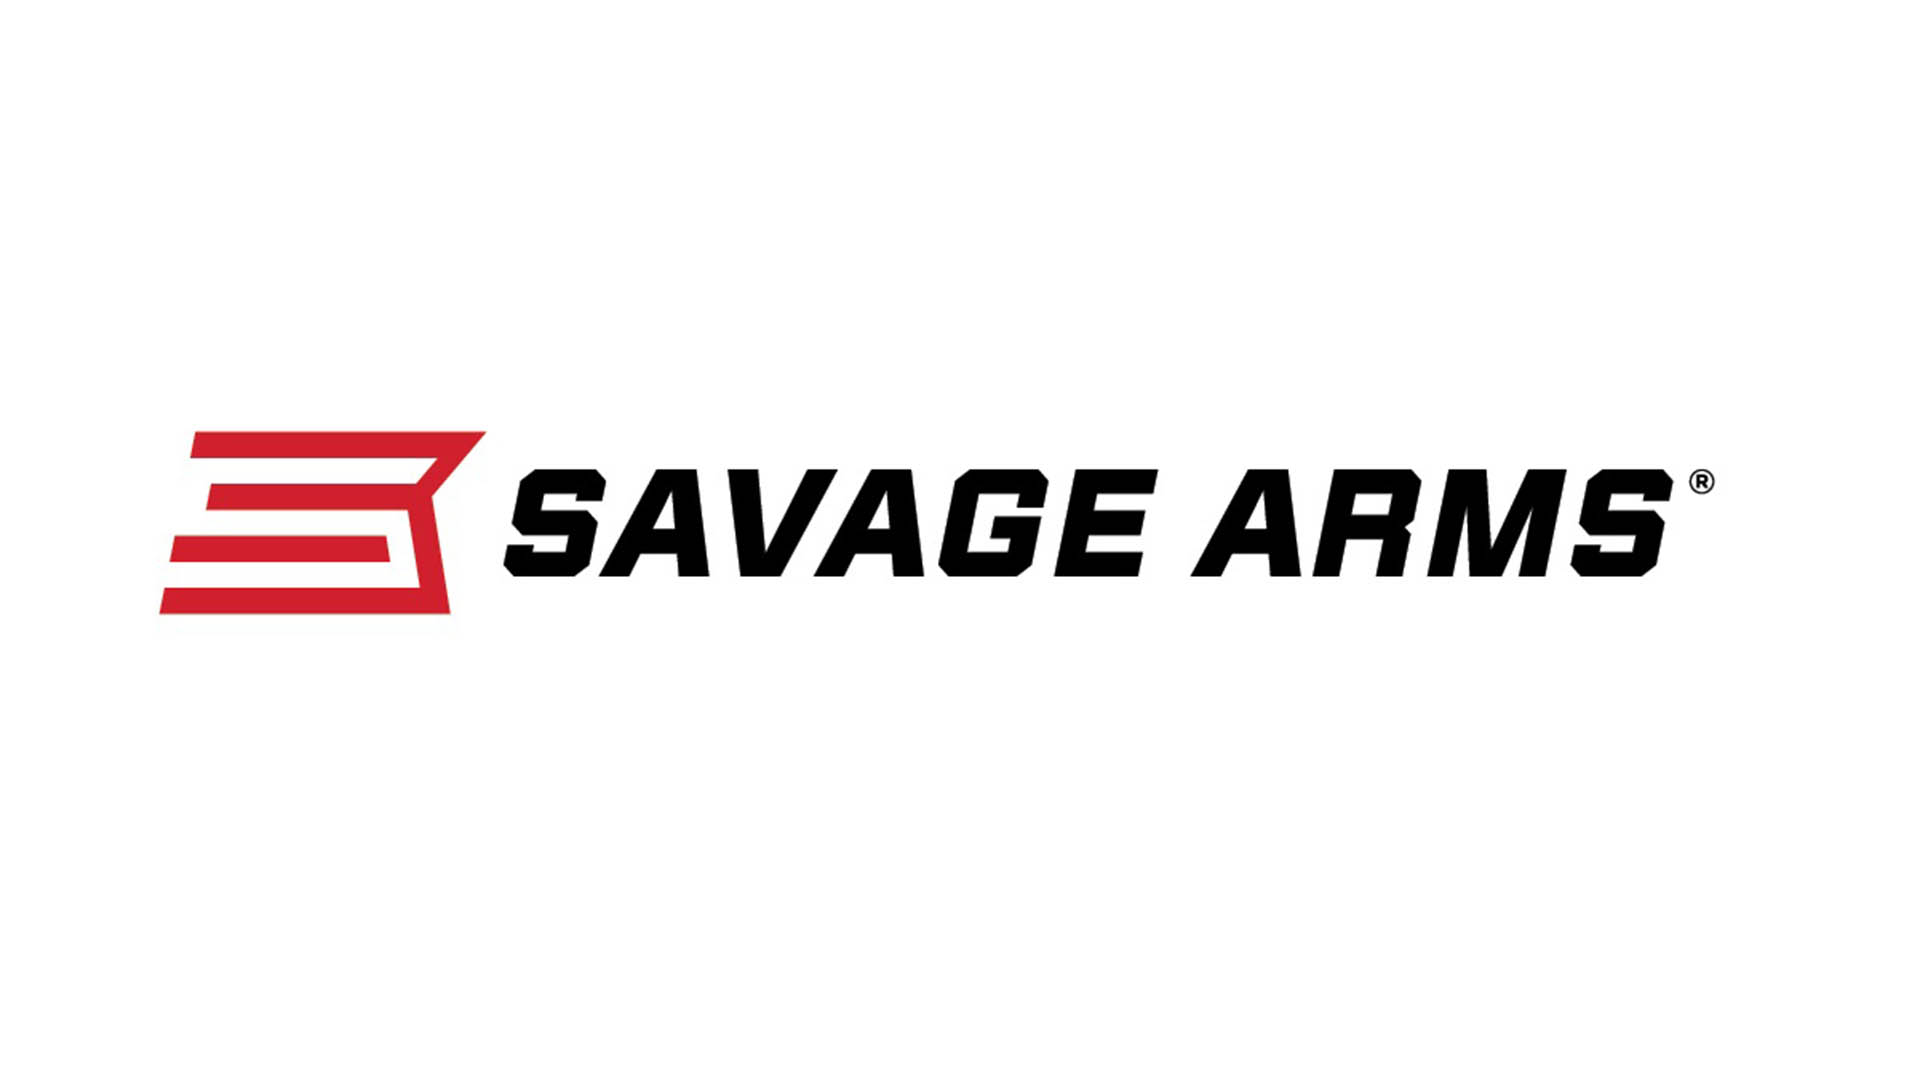 New Precision Series Centerfire and Rimfire Rifles from Savage « Daily  Bulletin